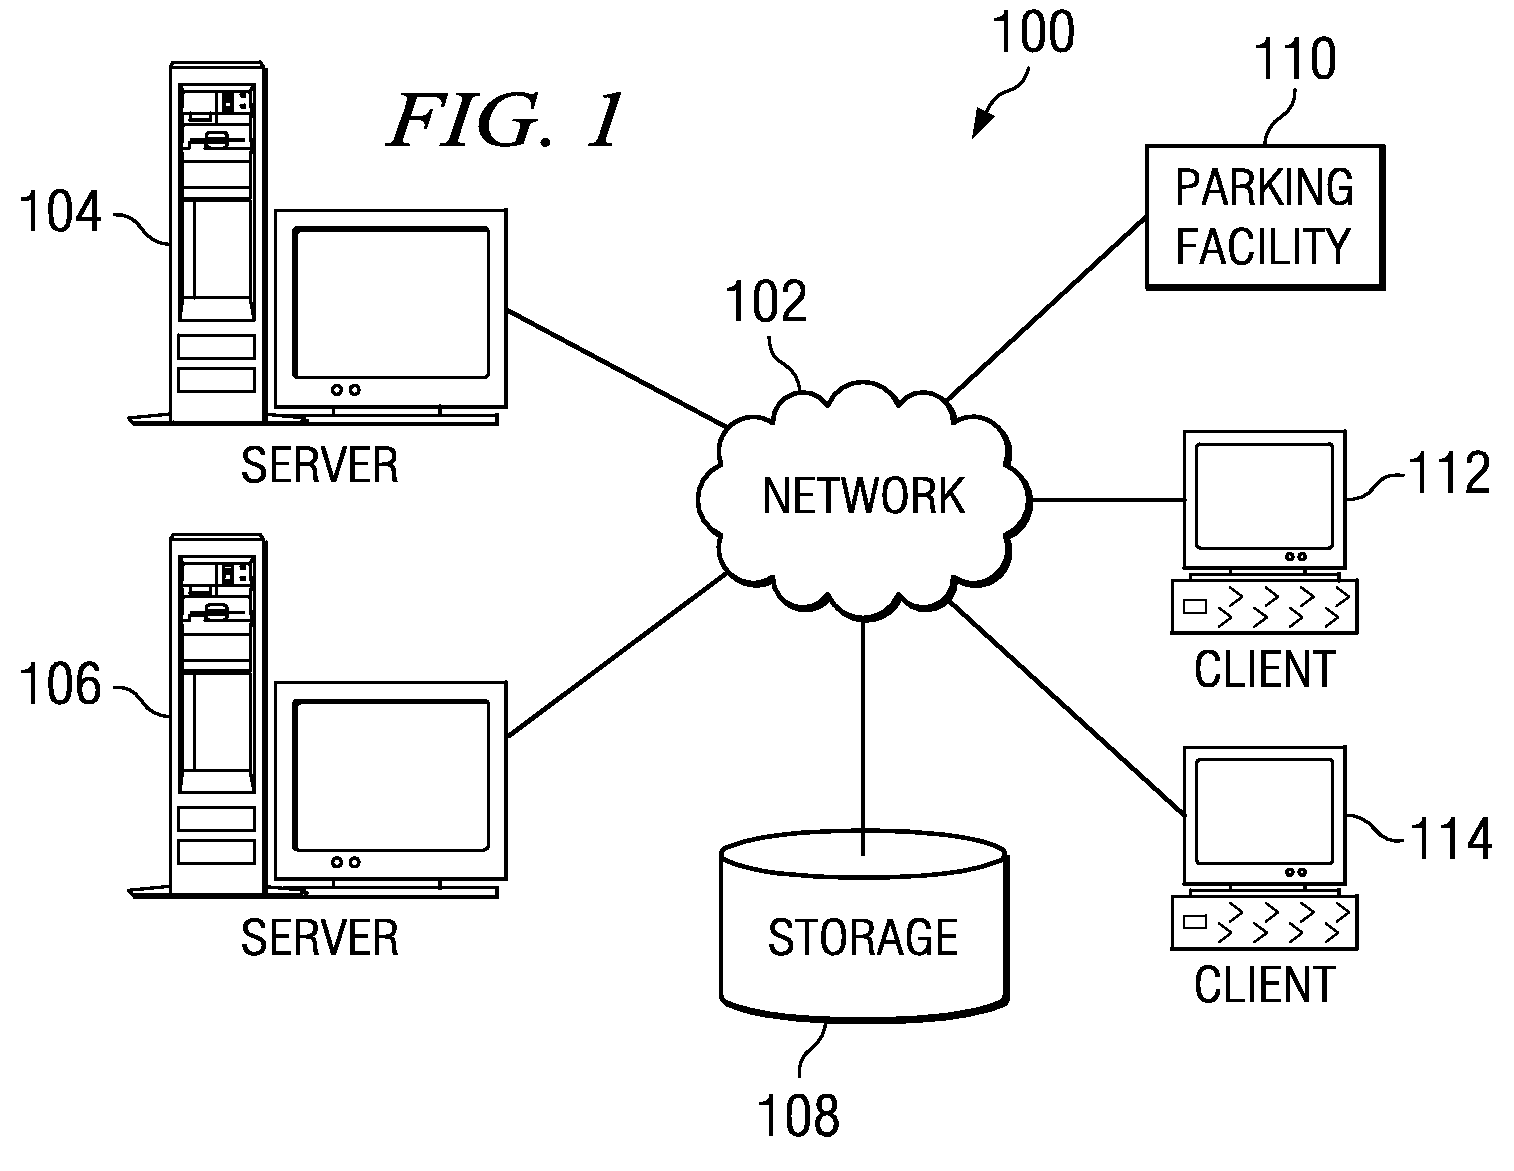 Method and apparatus for managing parking lots